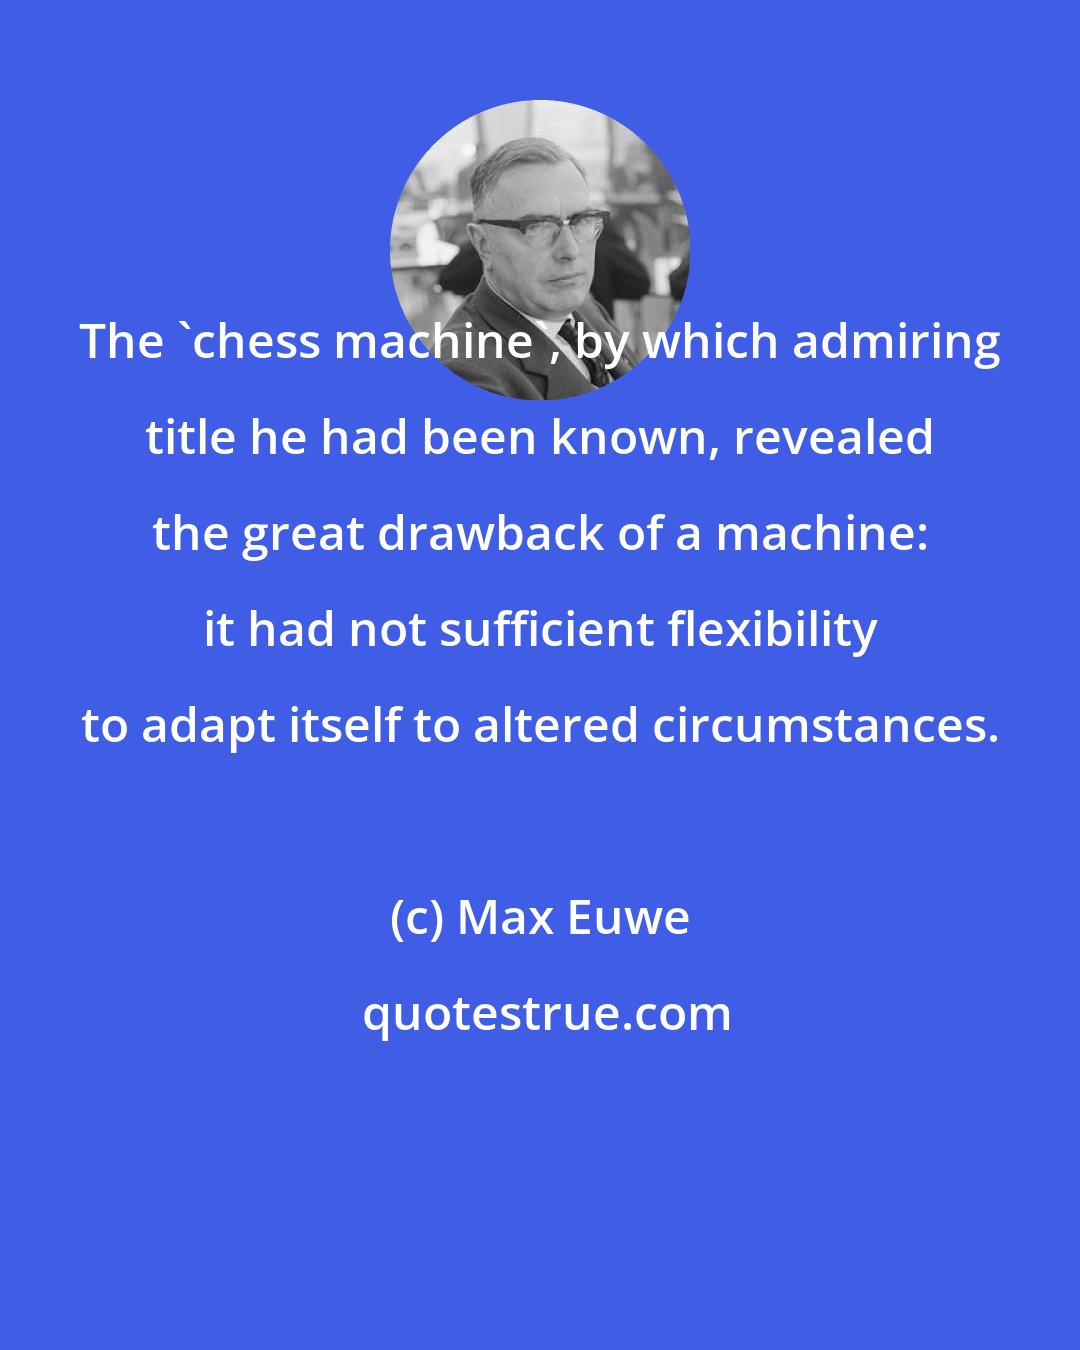 Max Euwe: The 'chess machine', by which admiring title he had been known, revealed the great drawback of a machine: it had not sufficient flexibility to adapt itself to altered circumstances.